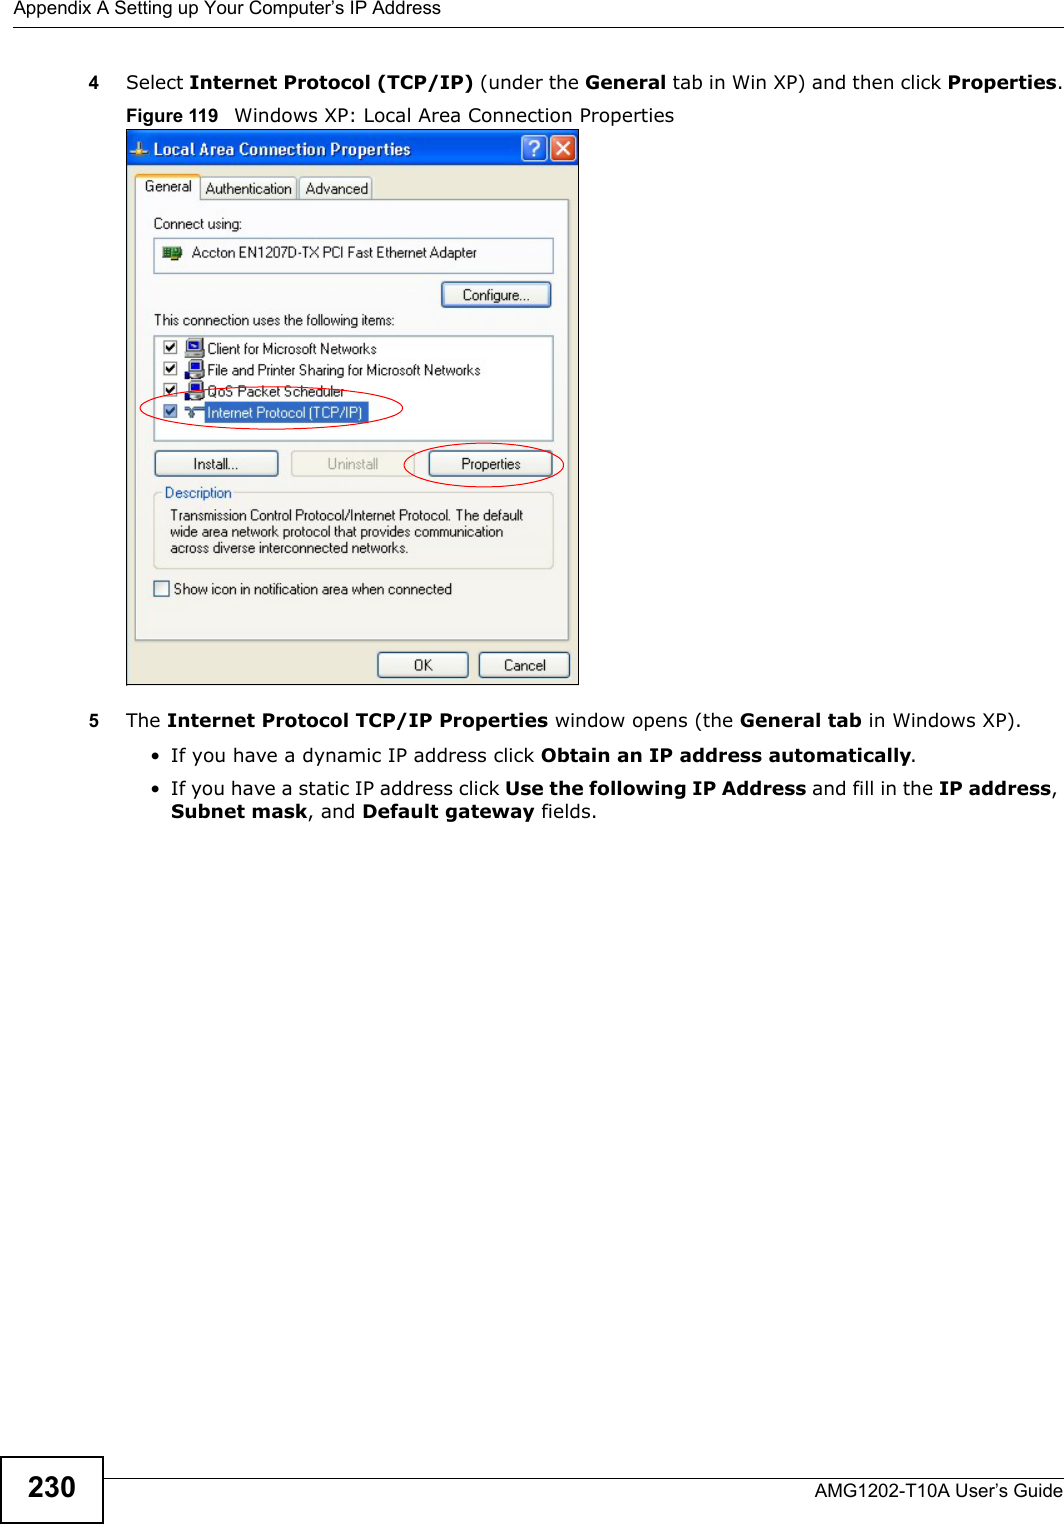 Appendix A Setting up Your Computer’s IP AddressAMG1202-T10A User’s Guide2304Select Internet Protocol (TCP/IP) (under the General tab in Win XP) and then click Properties.Figure 119   Windows XP: Local Area Connection Properties5The Internet Protocol TCP/IP Properties window opens (the General tab in Windows XP).• If you have a dynamic IP address click Obtain an IP address automatically.• If you have a static IP address click Use the following IP Address and fill in the IP address, Subnet mask, and Default gateway fields. 